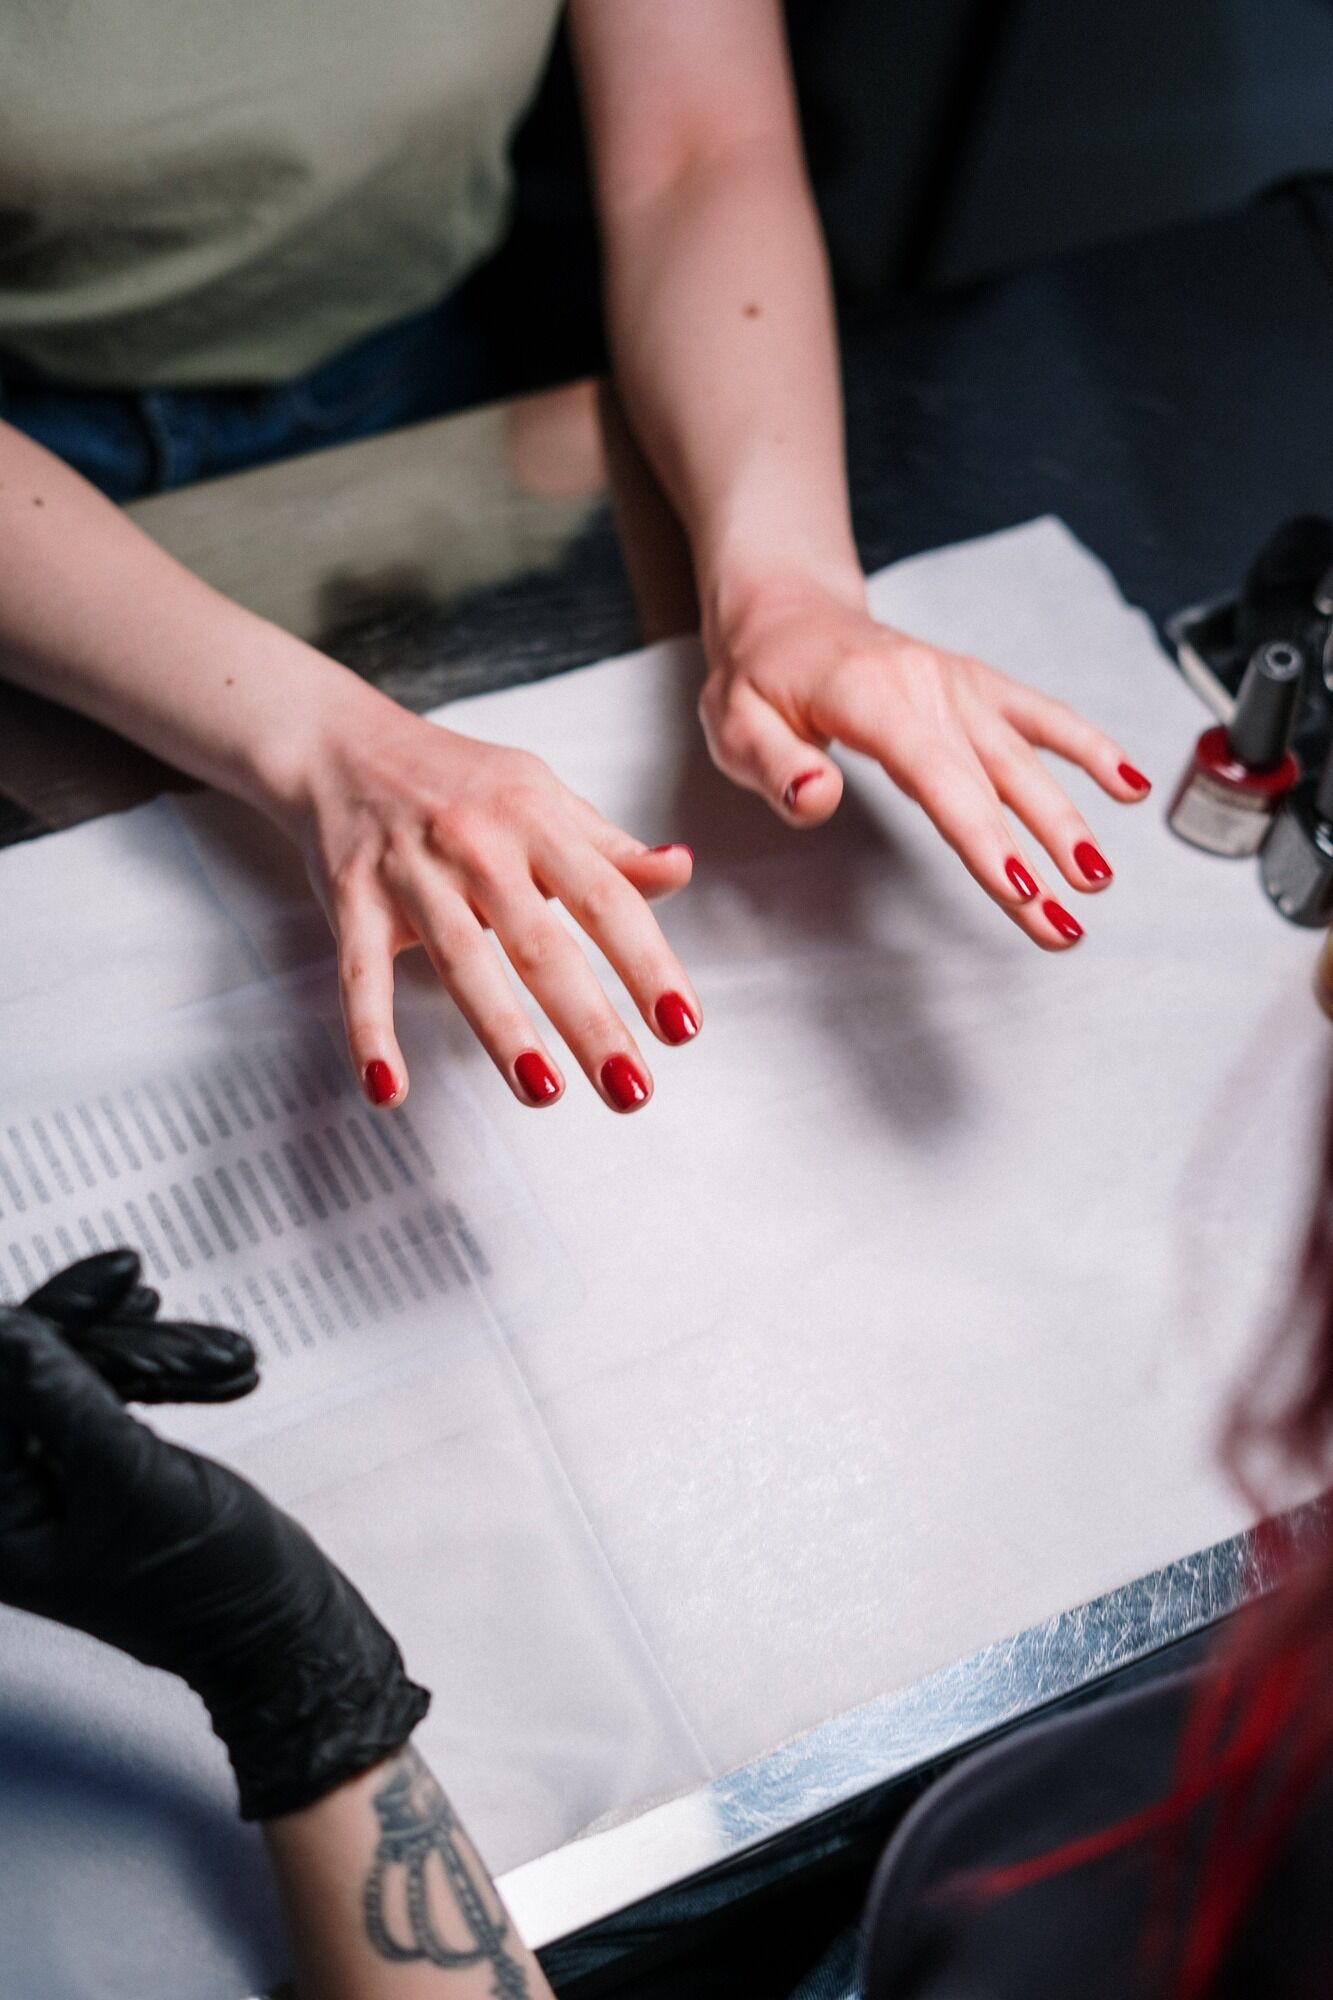 They will be everywhere: top 6 manicure trends for 2024